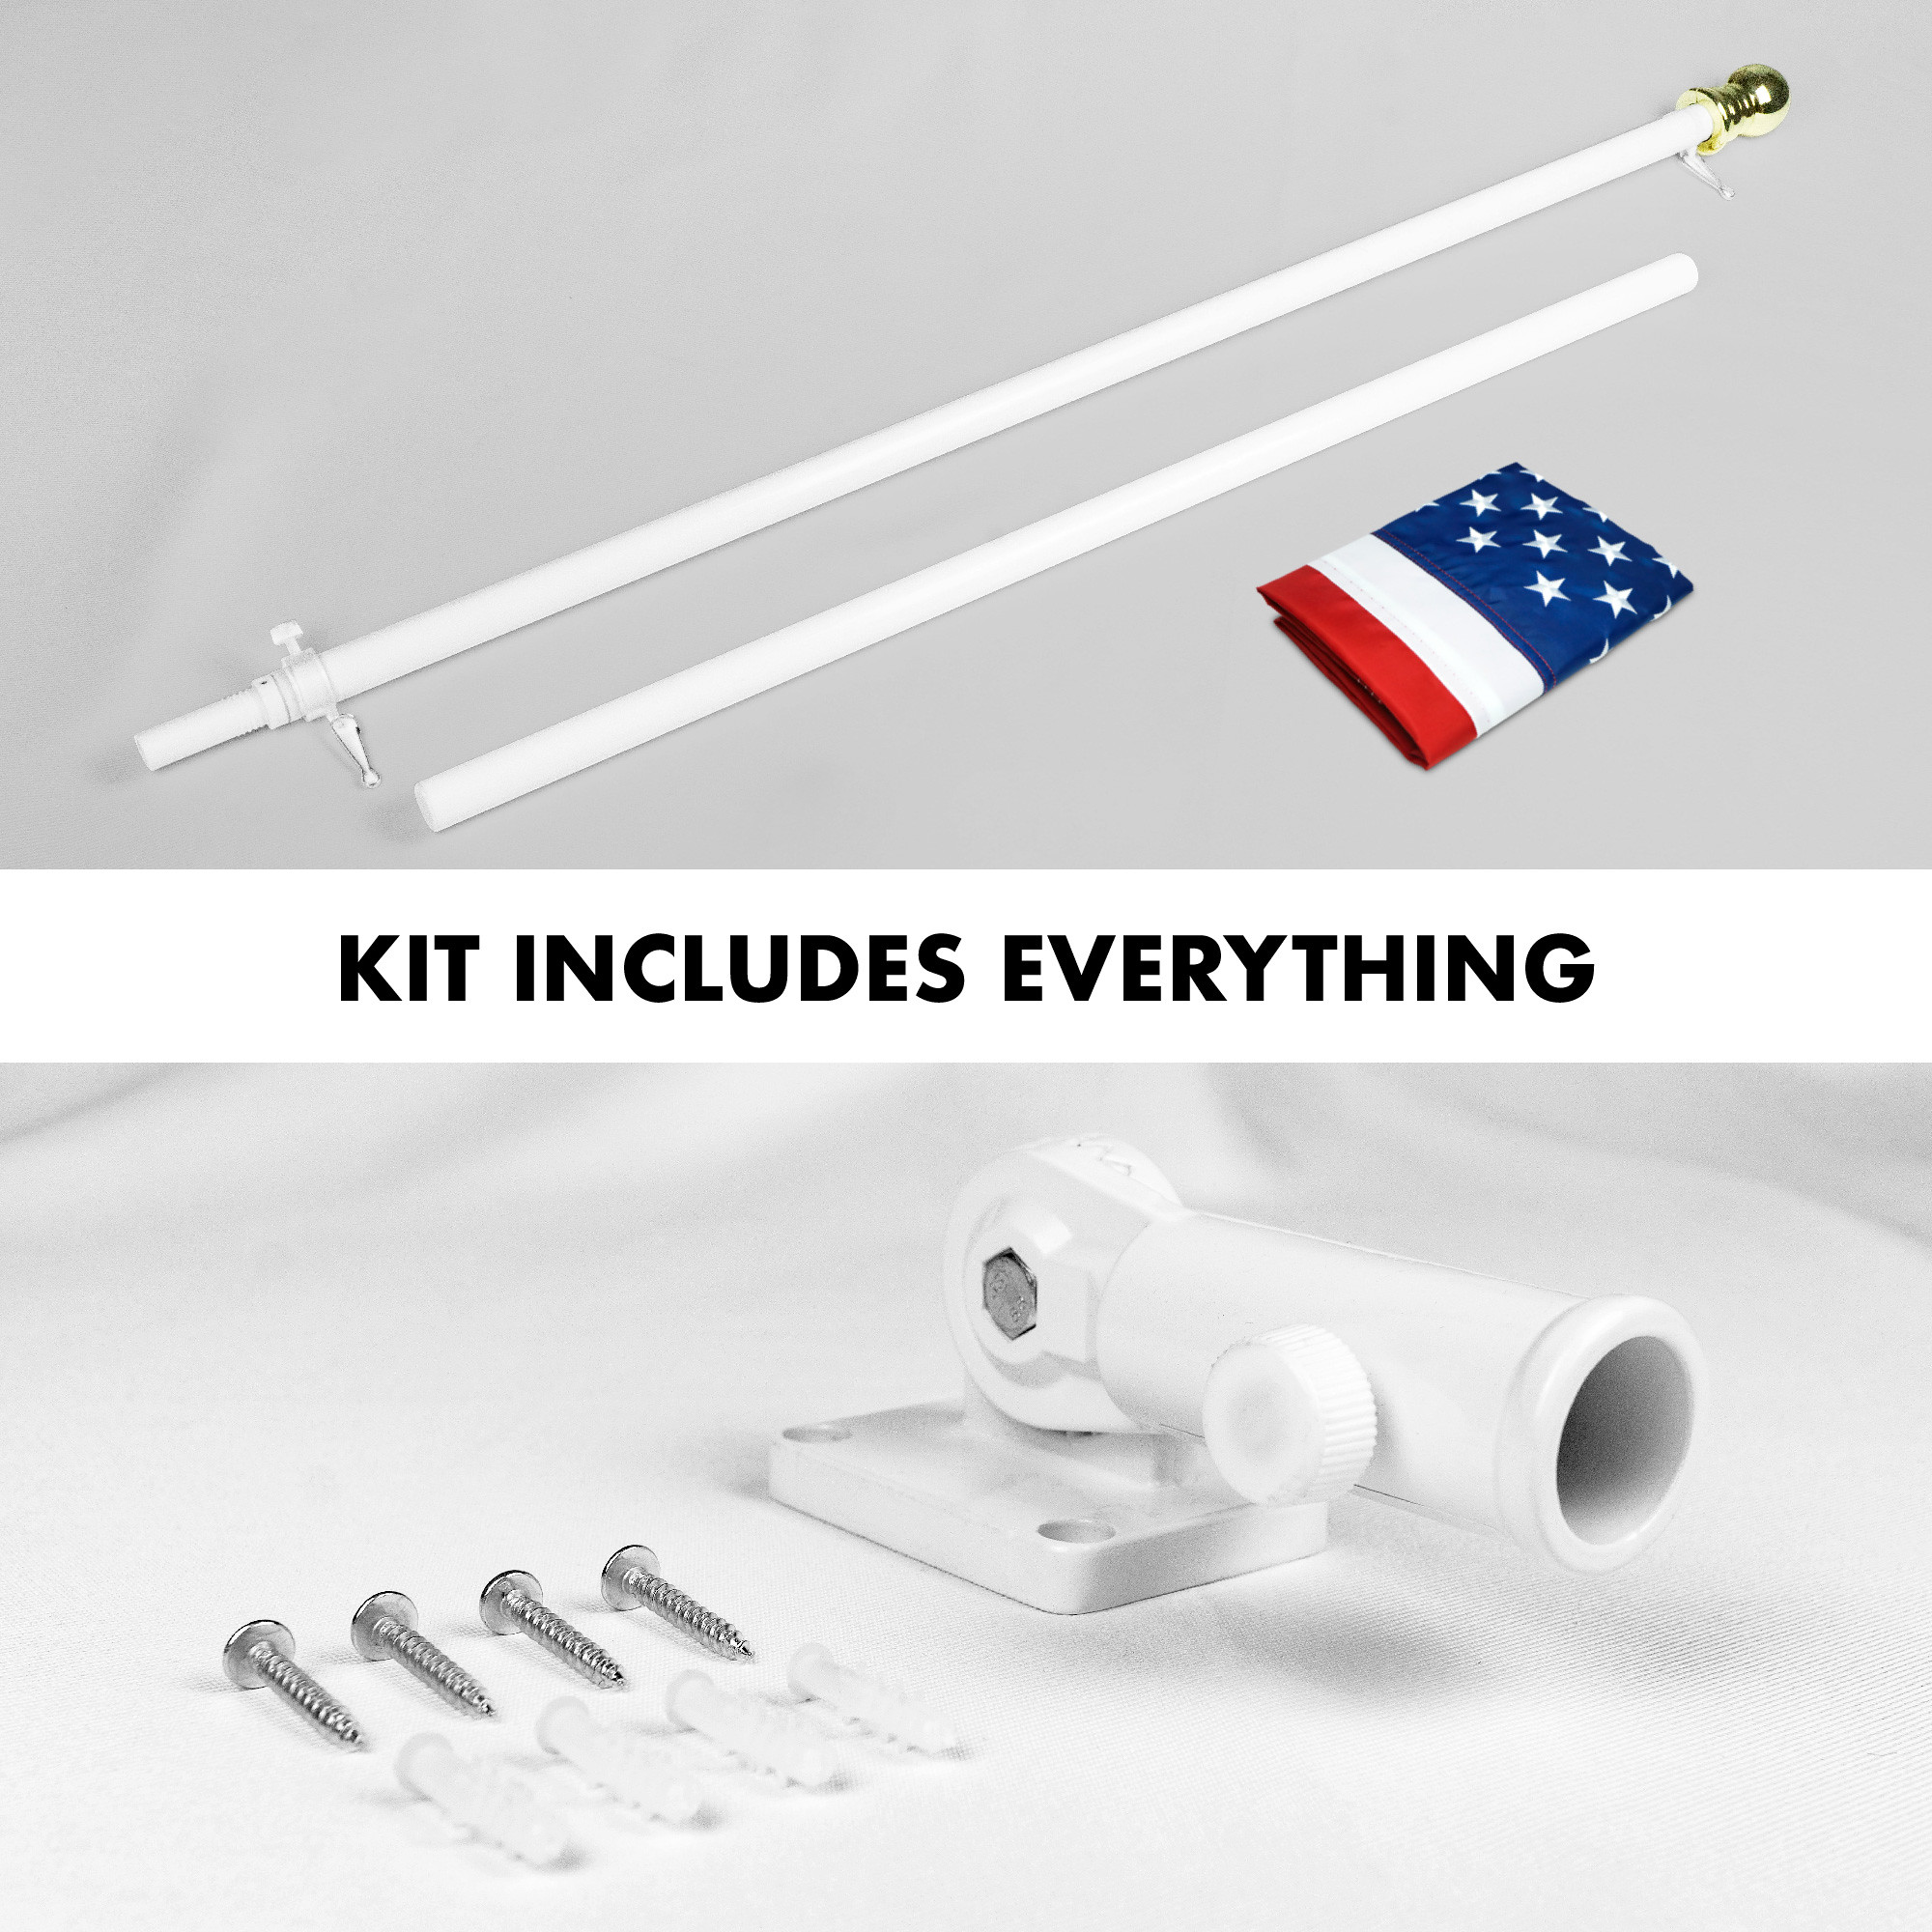 G128 - 5 Feet Tangle Free Spinning Flagpole (White) American Flag Pole Sleeve Embroidered 2x3 ft American Flag Pole Sleeve (Flag Included) Aluminum Flag Pole - image 2 of 9